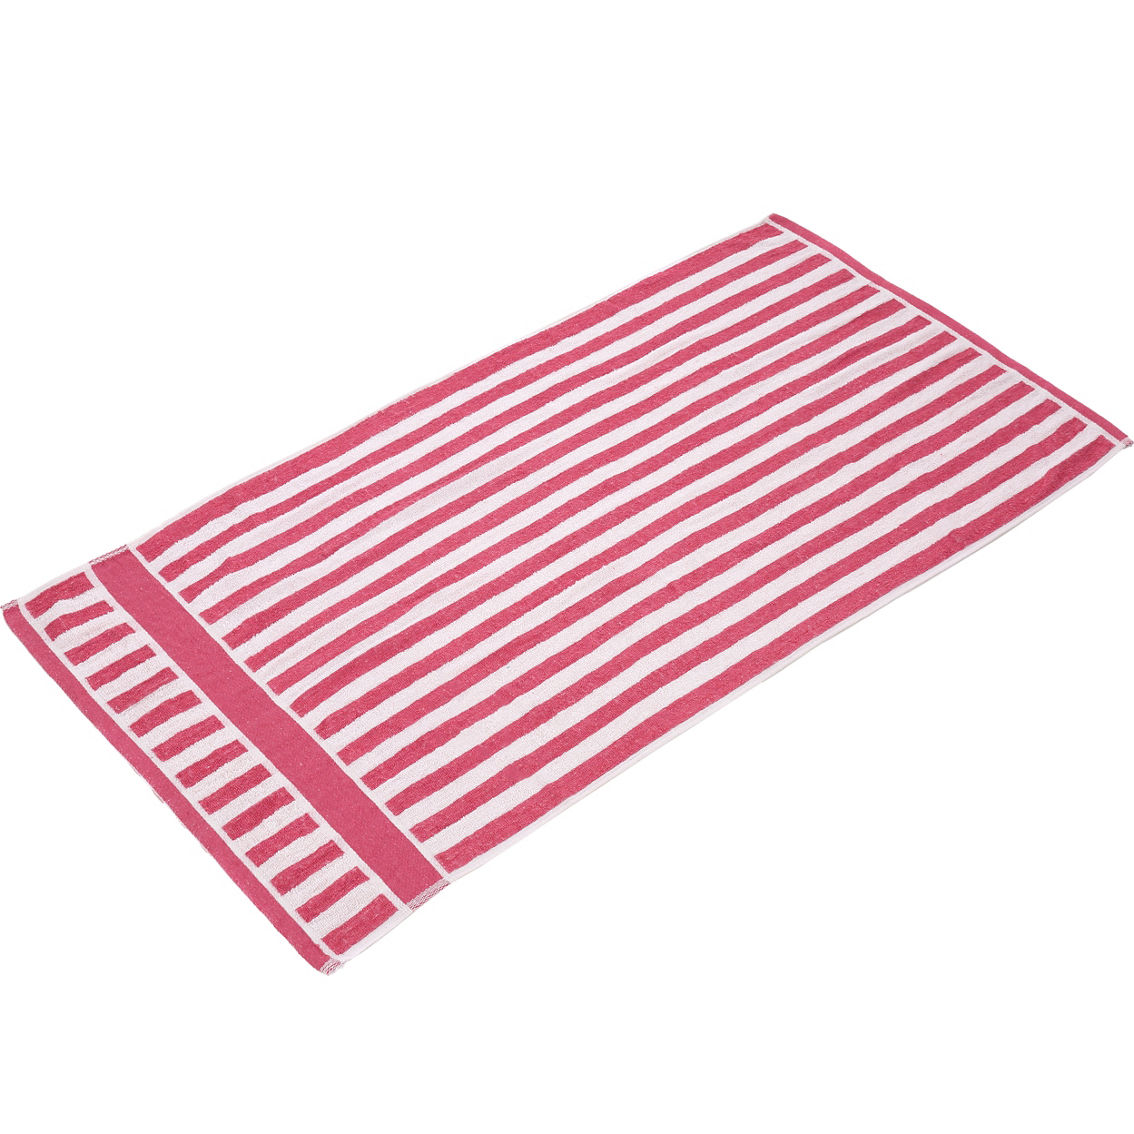 Simply Perfect Beach Towels 2 pk. - Image 3 of 4